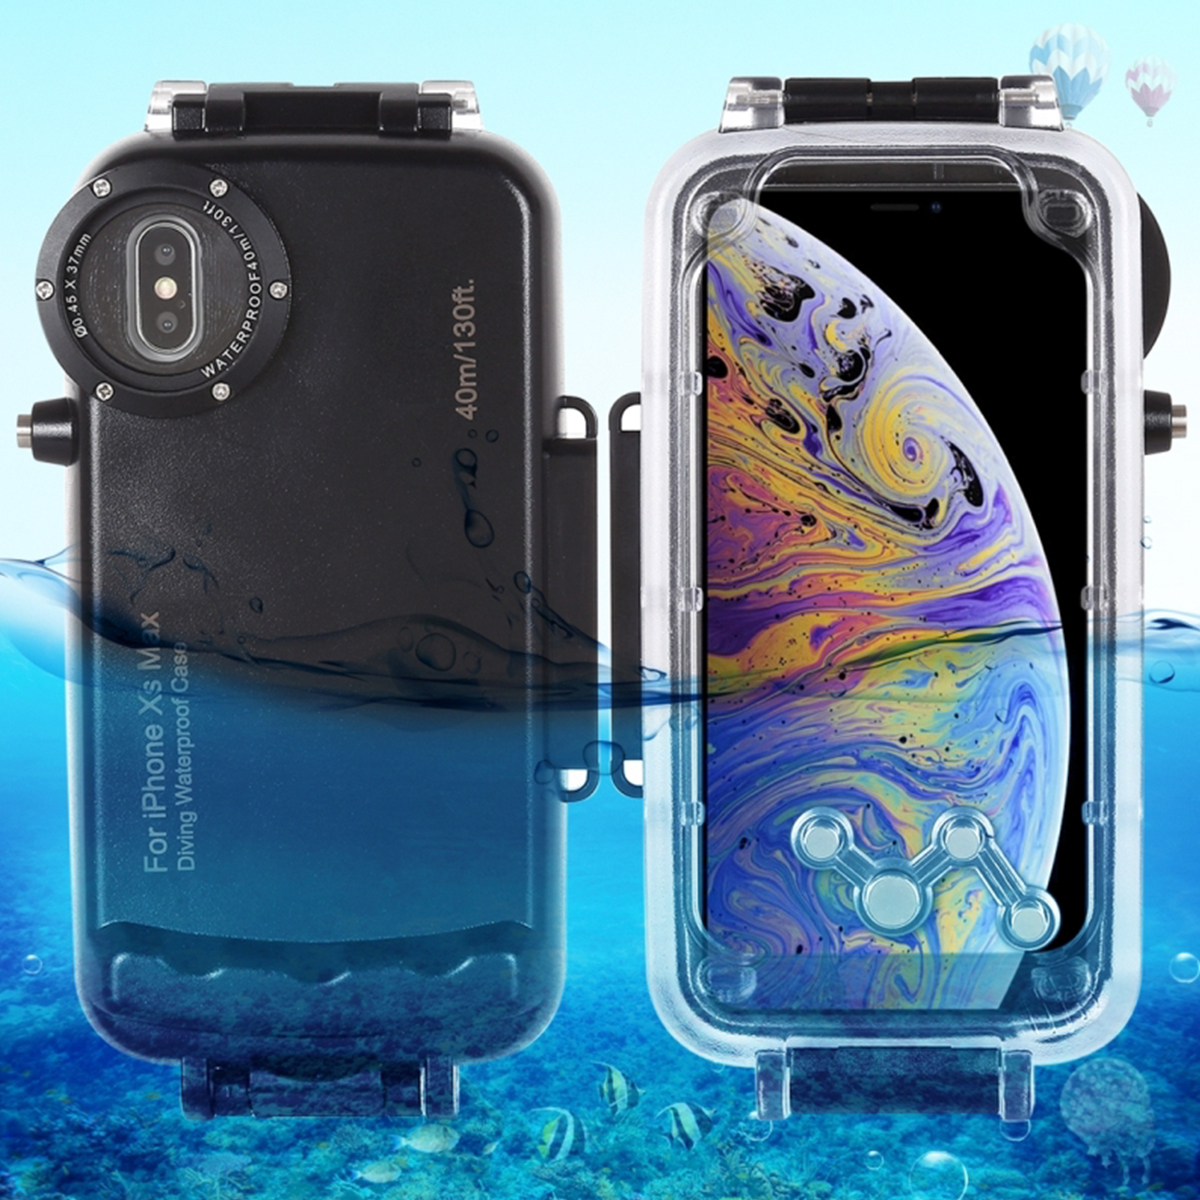 

40m Diving Anti-pressure Anti-explosion Shockproof Waterproof Case For iPhone XS Max/XR/X/XS/8 Plus/7 Plus/8/7